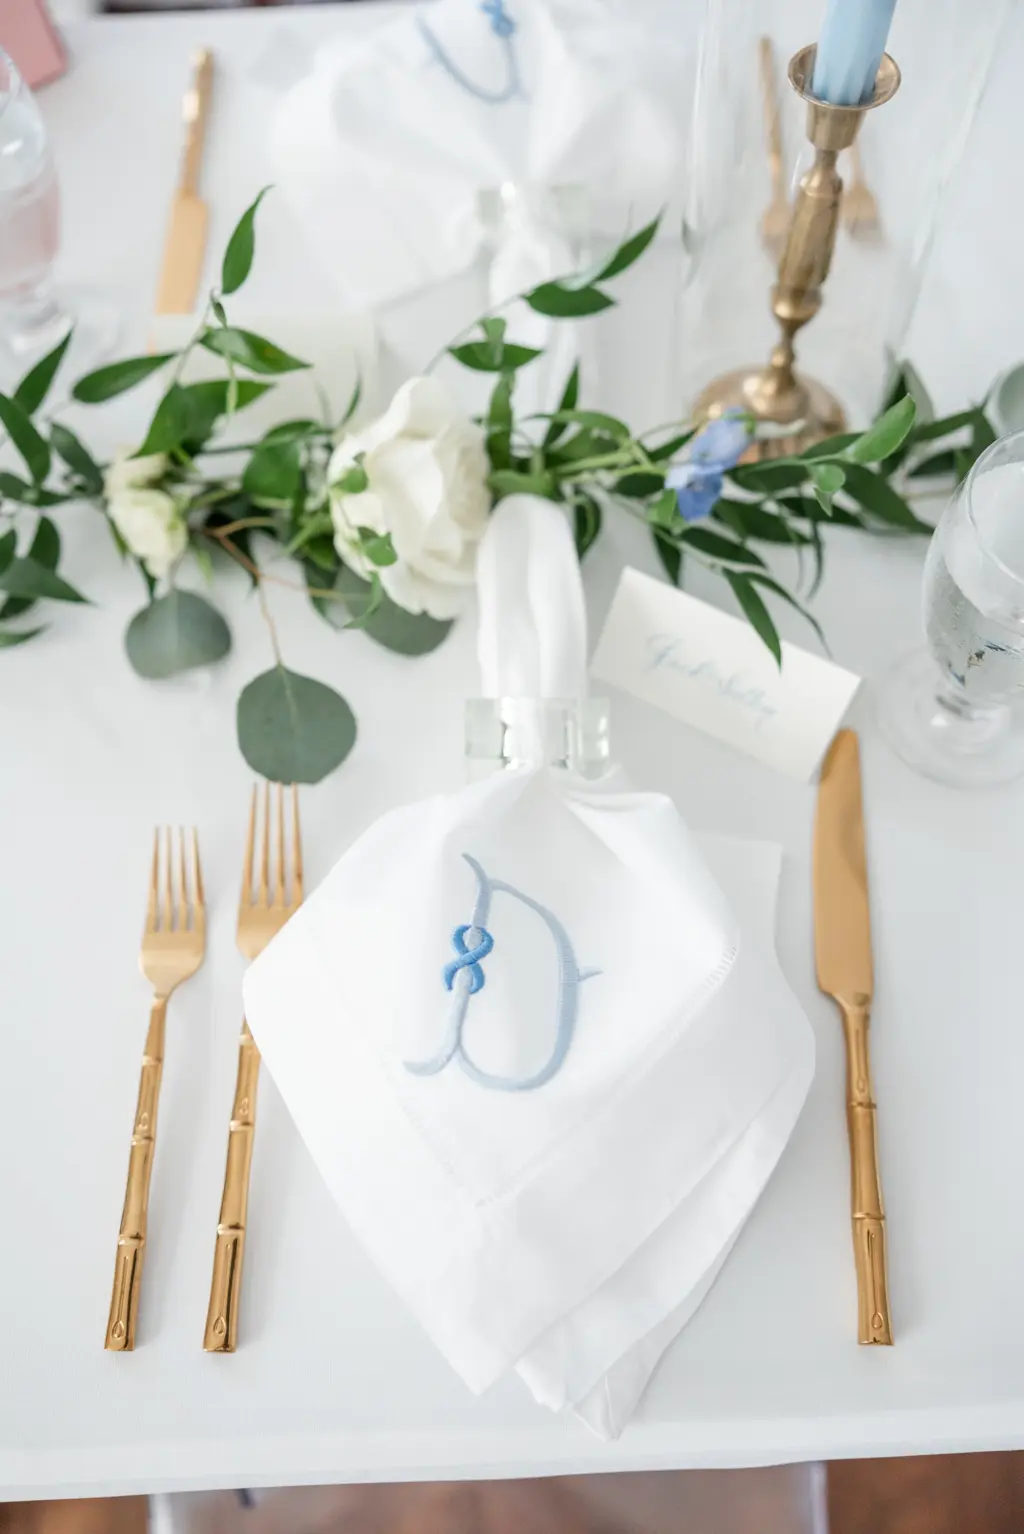 Custom Embroidered Napkins for Wedding Guests | Gold Flatware | Greenery Garland | White and Blue Wedding Reception Inspiration | Tampa Bay Kate Ryan Event Rentals | Planner Kelci Leigh Events